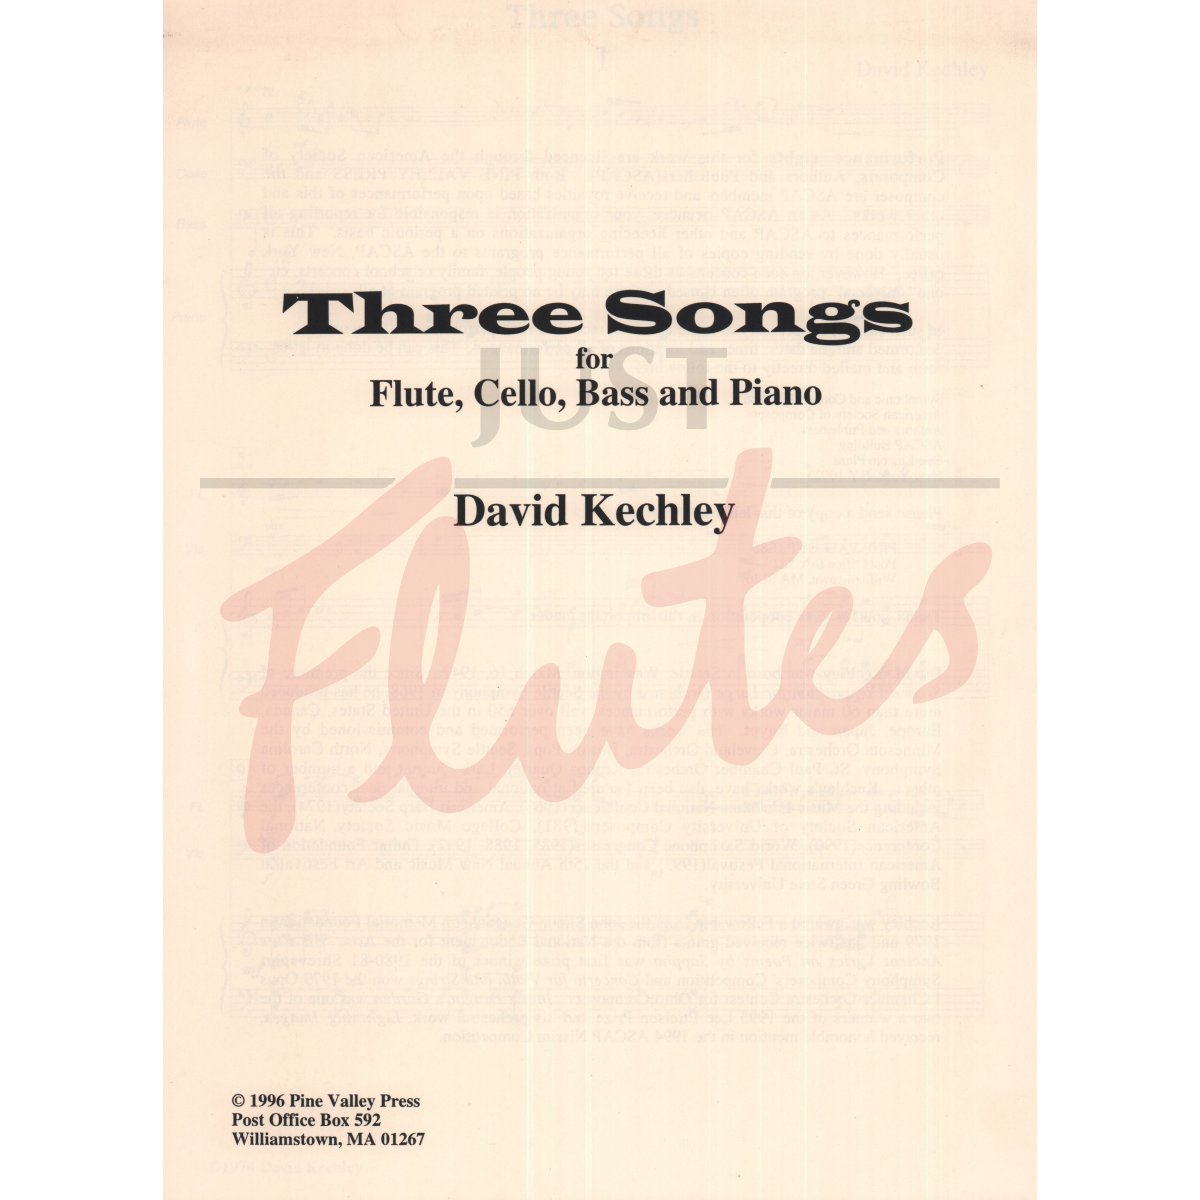 Three Songs for Flute, Cello, Bass and Piano